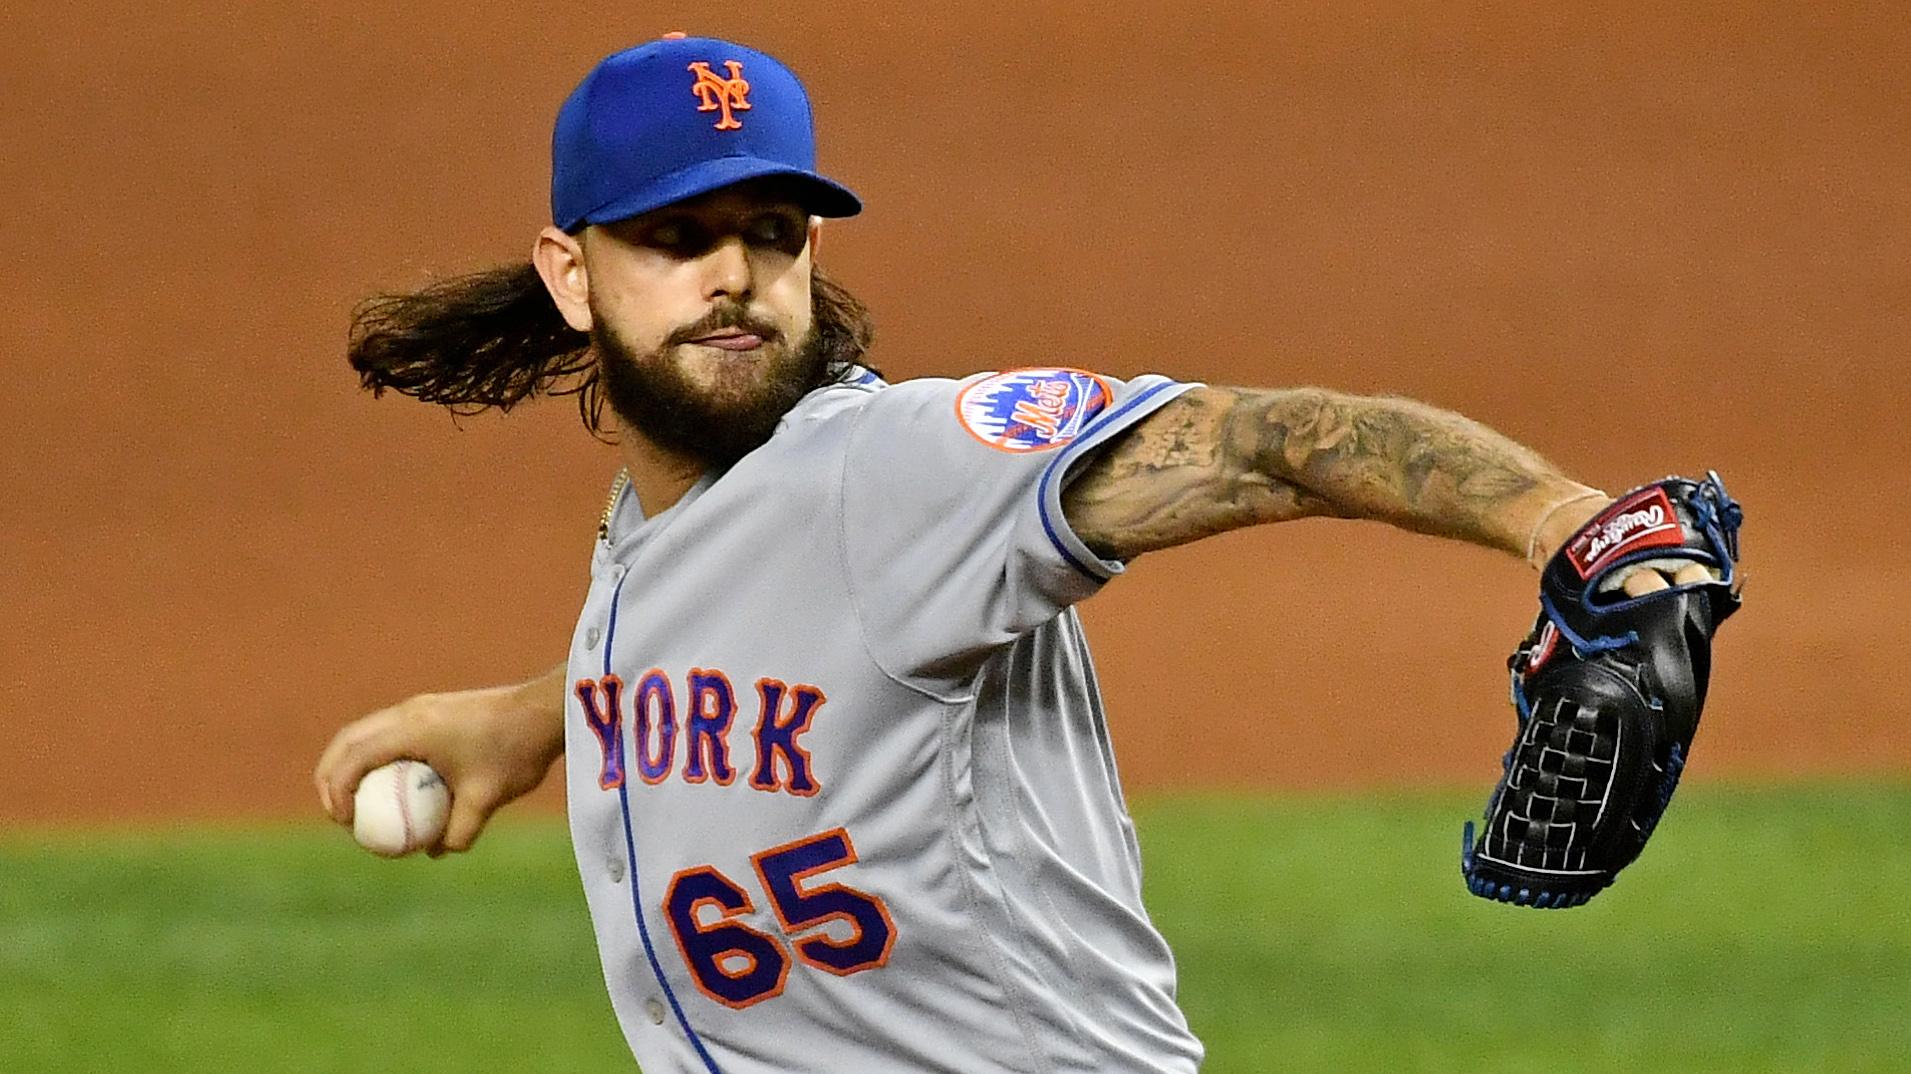 Aug 17, 2020; Miami, Florida, USA; New York Mets relief pitcher Robert Gsellman (65) delivers a pitch in the first inning against the Miami Marlins at Marlins Park. / Jasen Vinlove-USA TODAY Sports